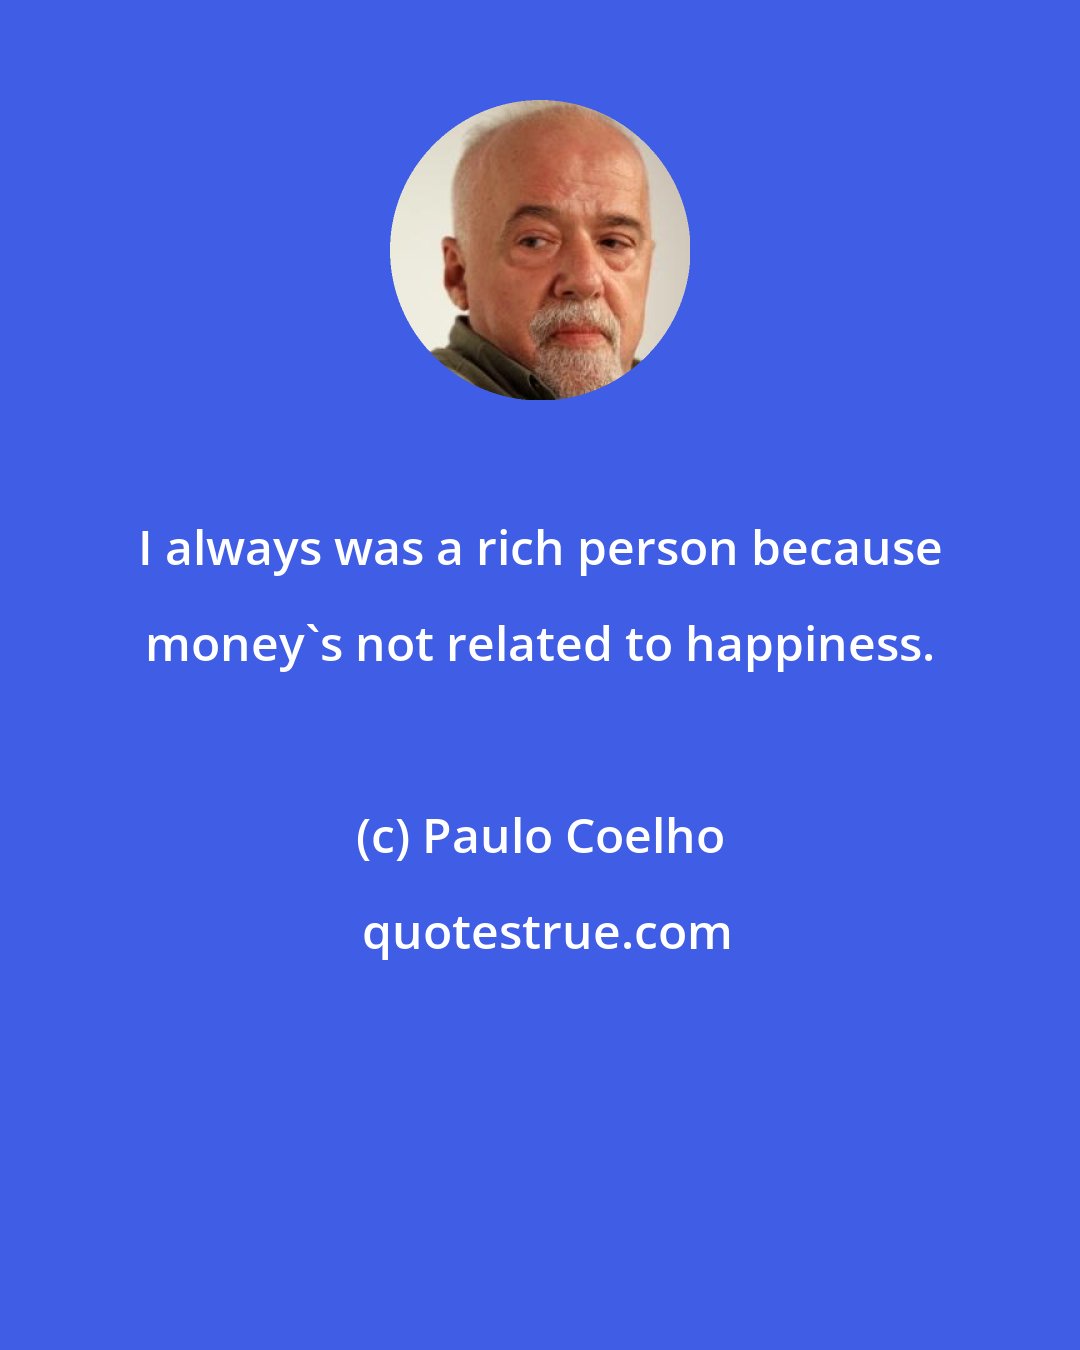 Paulo Coelho: I always was a rich person because money's not related to happiness.